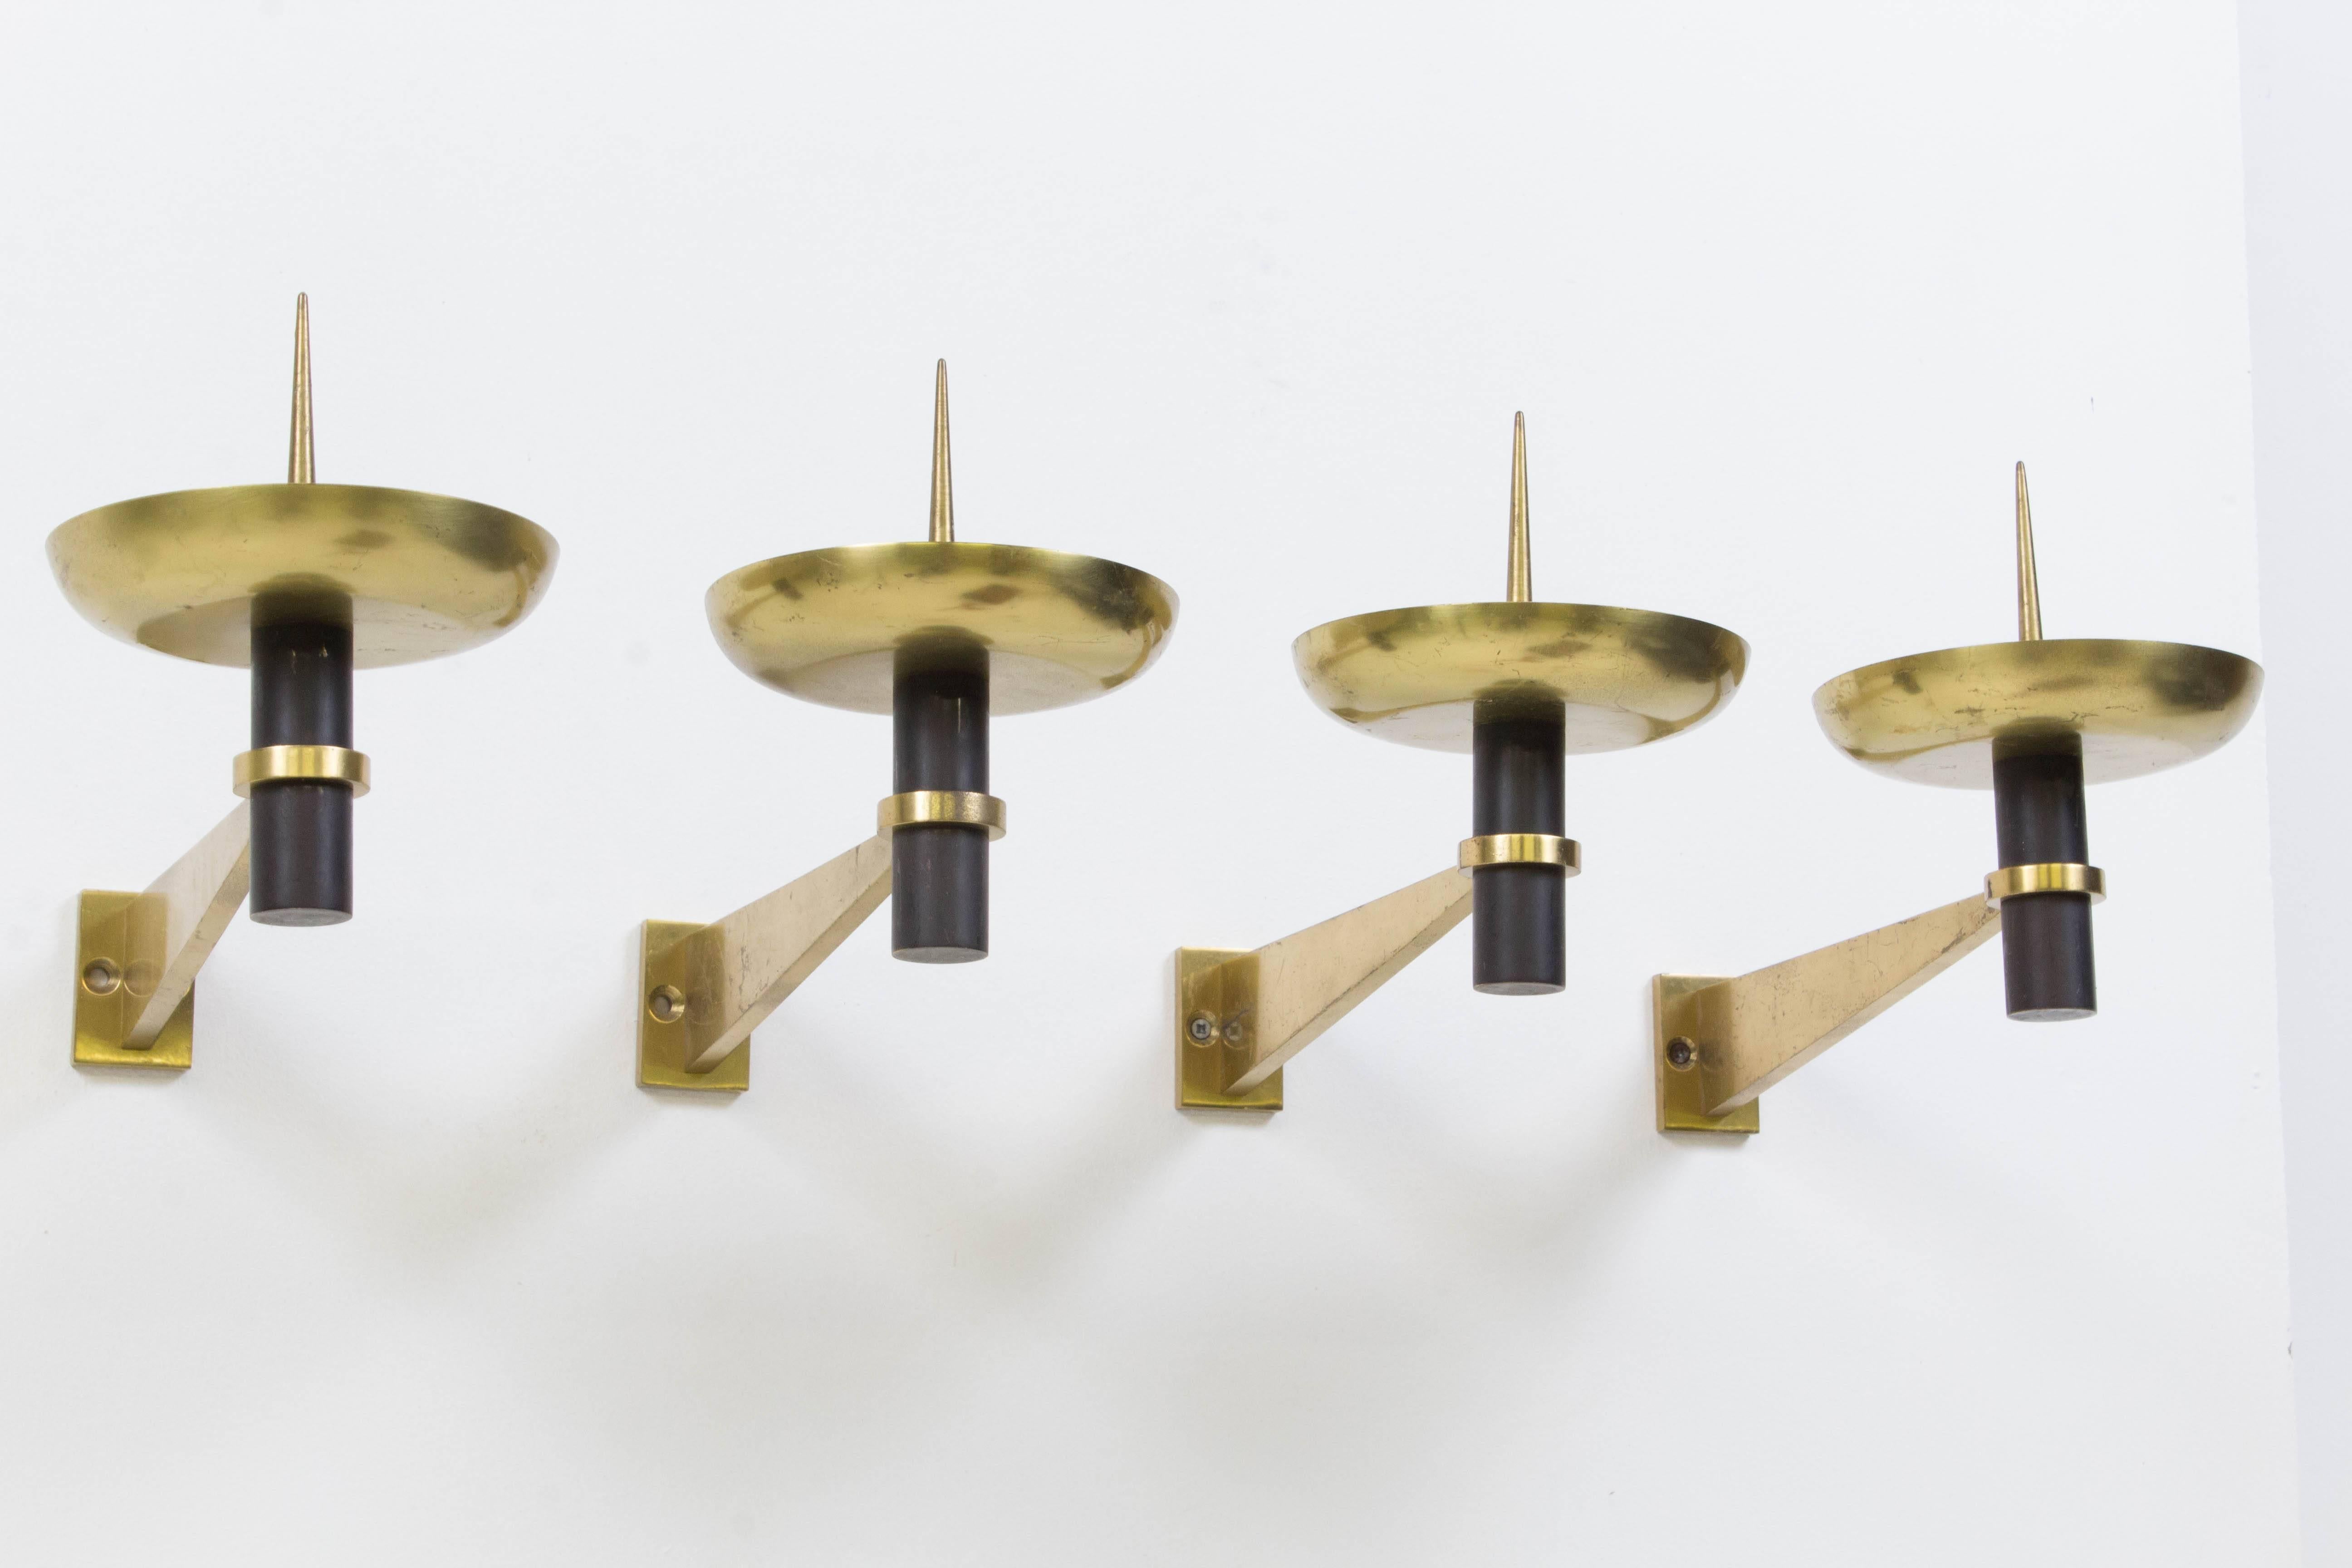 Rare set of four French Mid-Century Modern wall candle sconces, 1950s.
Solid brass with black lacquered metal.
Striking modernist design.
Some wear on the brass that goes on the wall.
In good original condition with minor wear consistent with